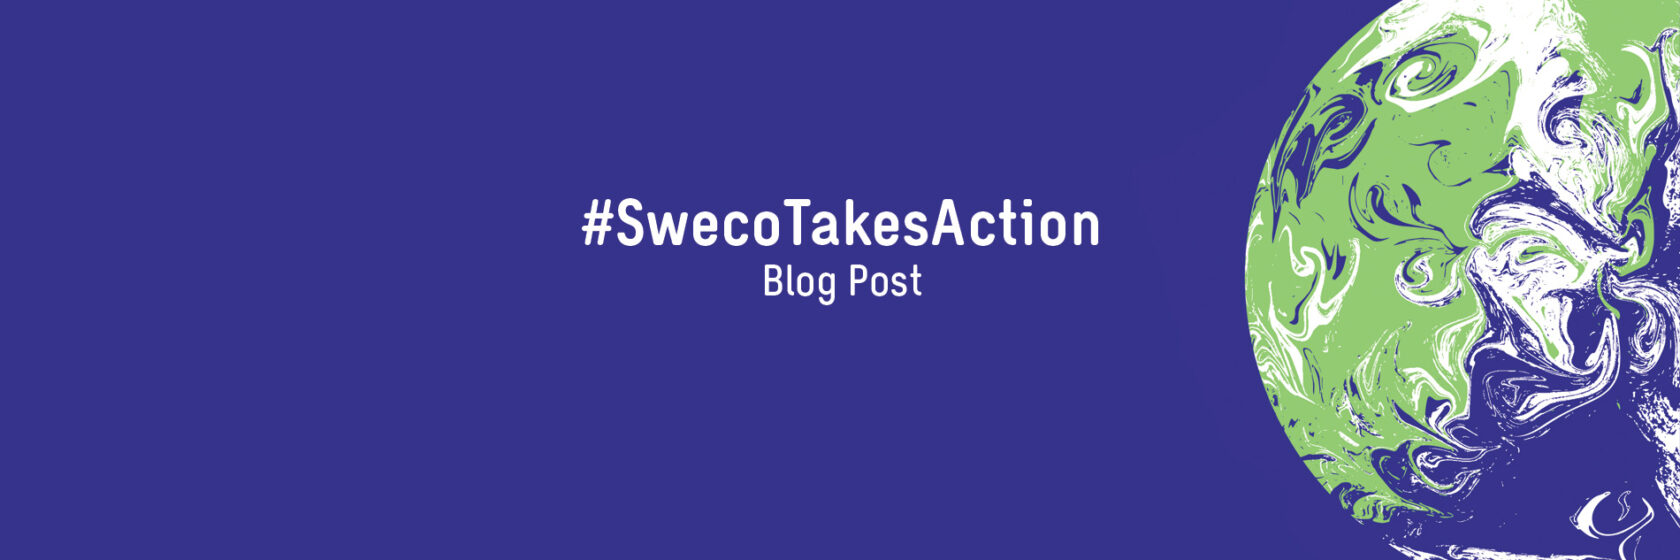 Sweco takes action hashtag placed on top of COP26 Un Climate Change Conference logo